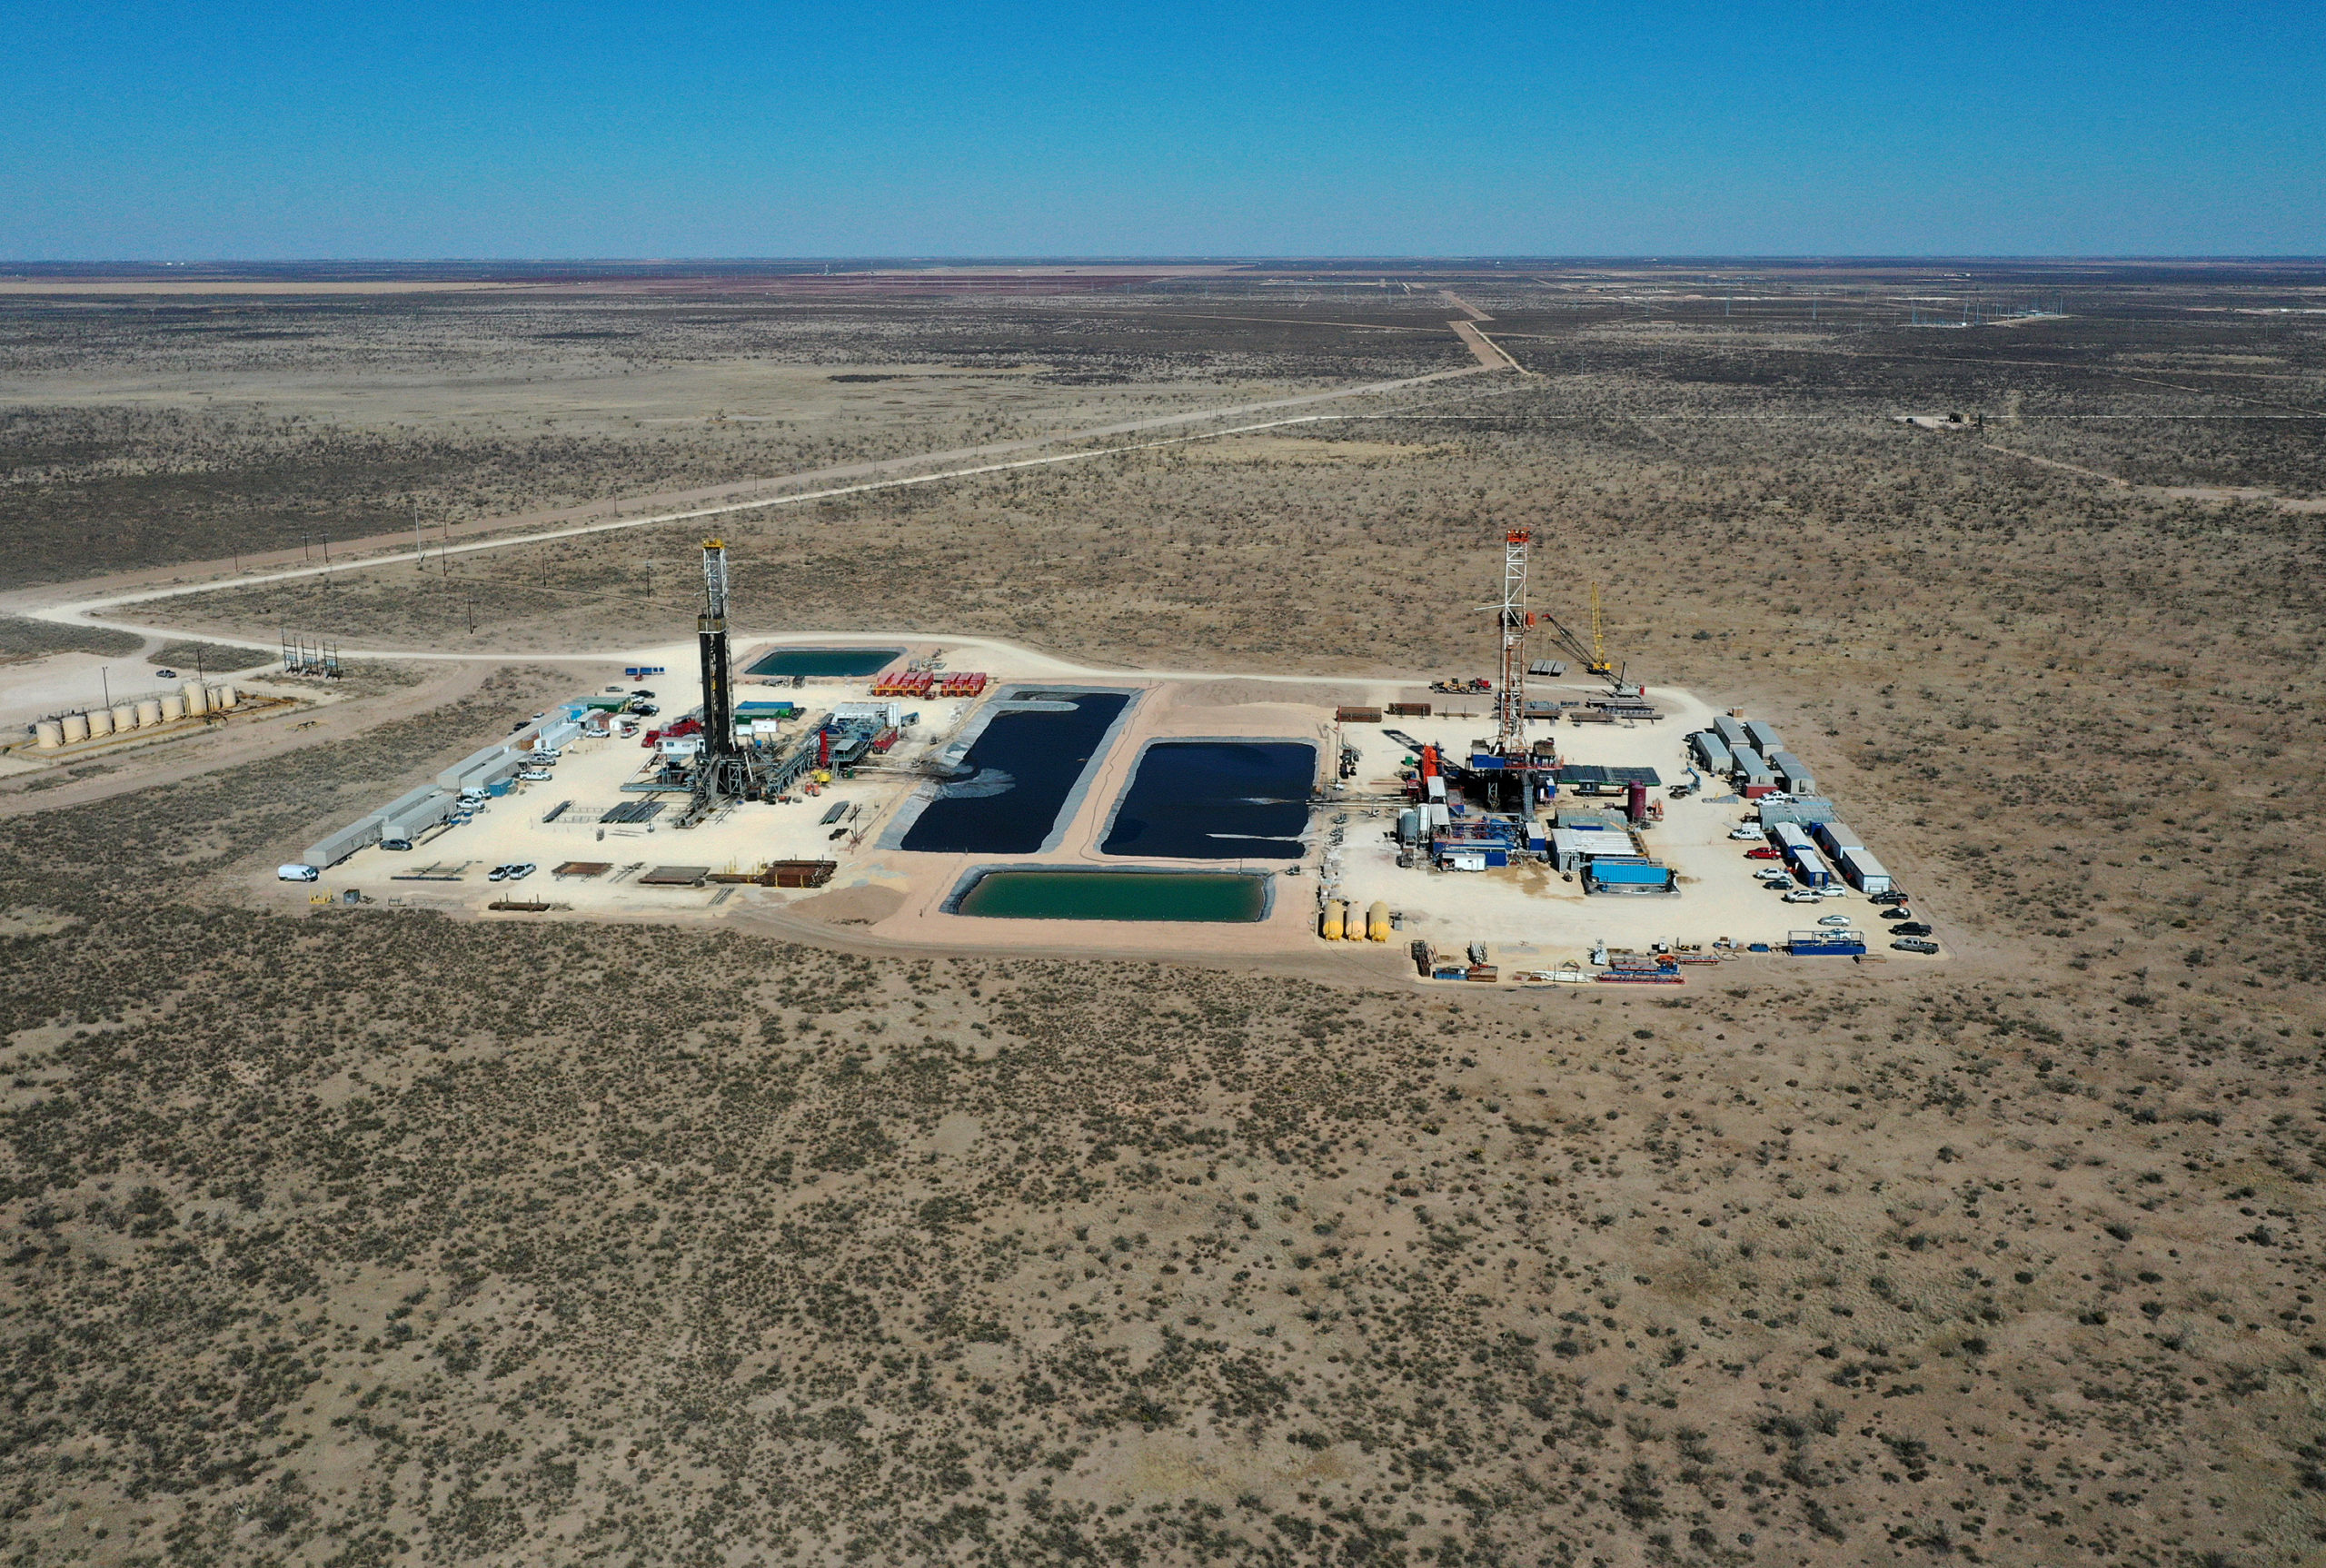 Oil drilling rigs work in the Permian Basin oil field on March 13 in Midland, Texas.  (Joe Raedle / Getty Images)